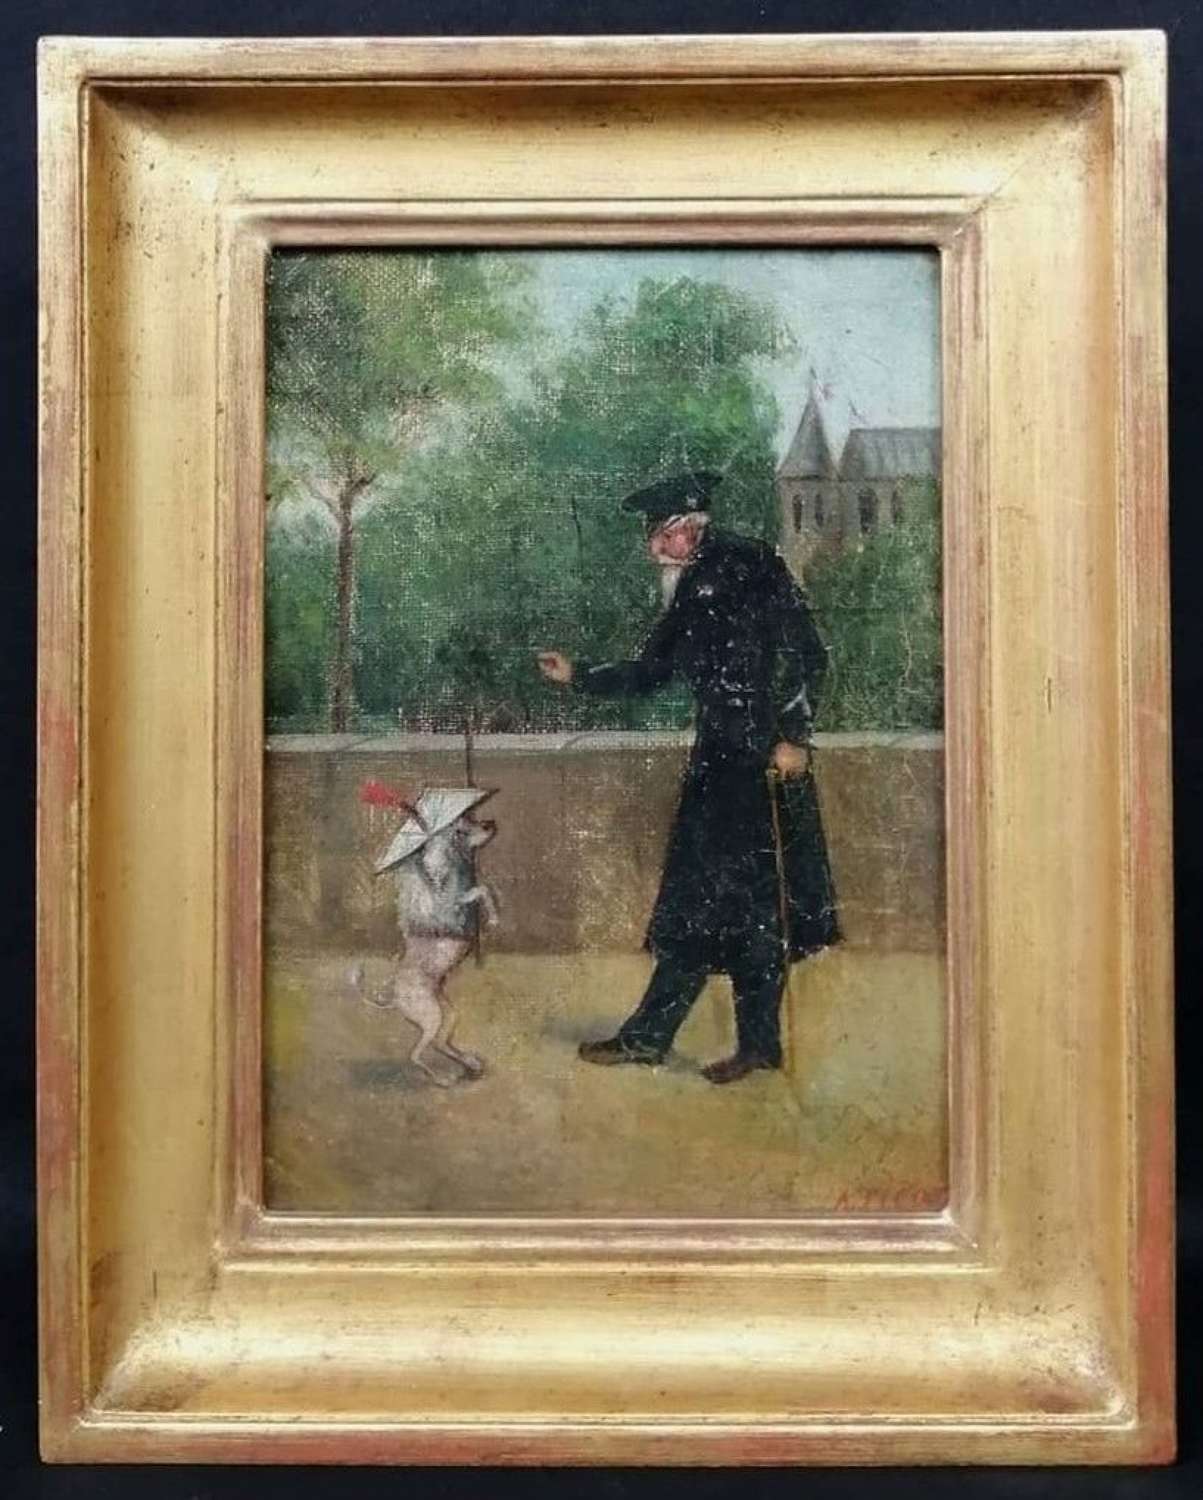 THE POODLE TRAINER (FRENCH, 19TH CENTURY)